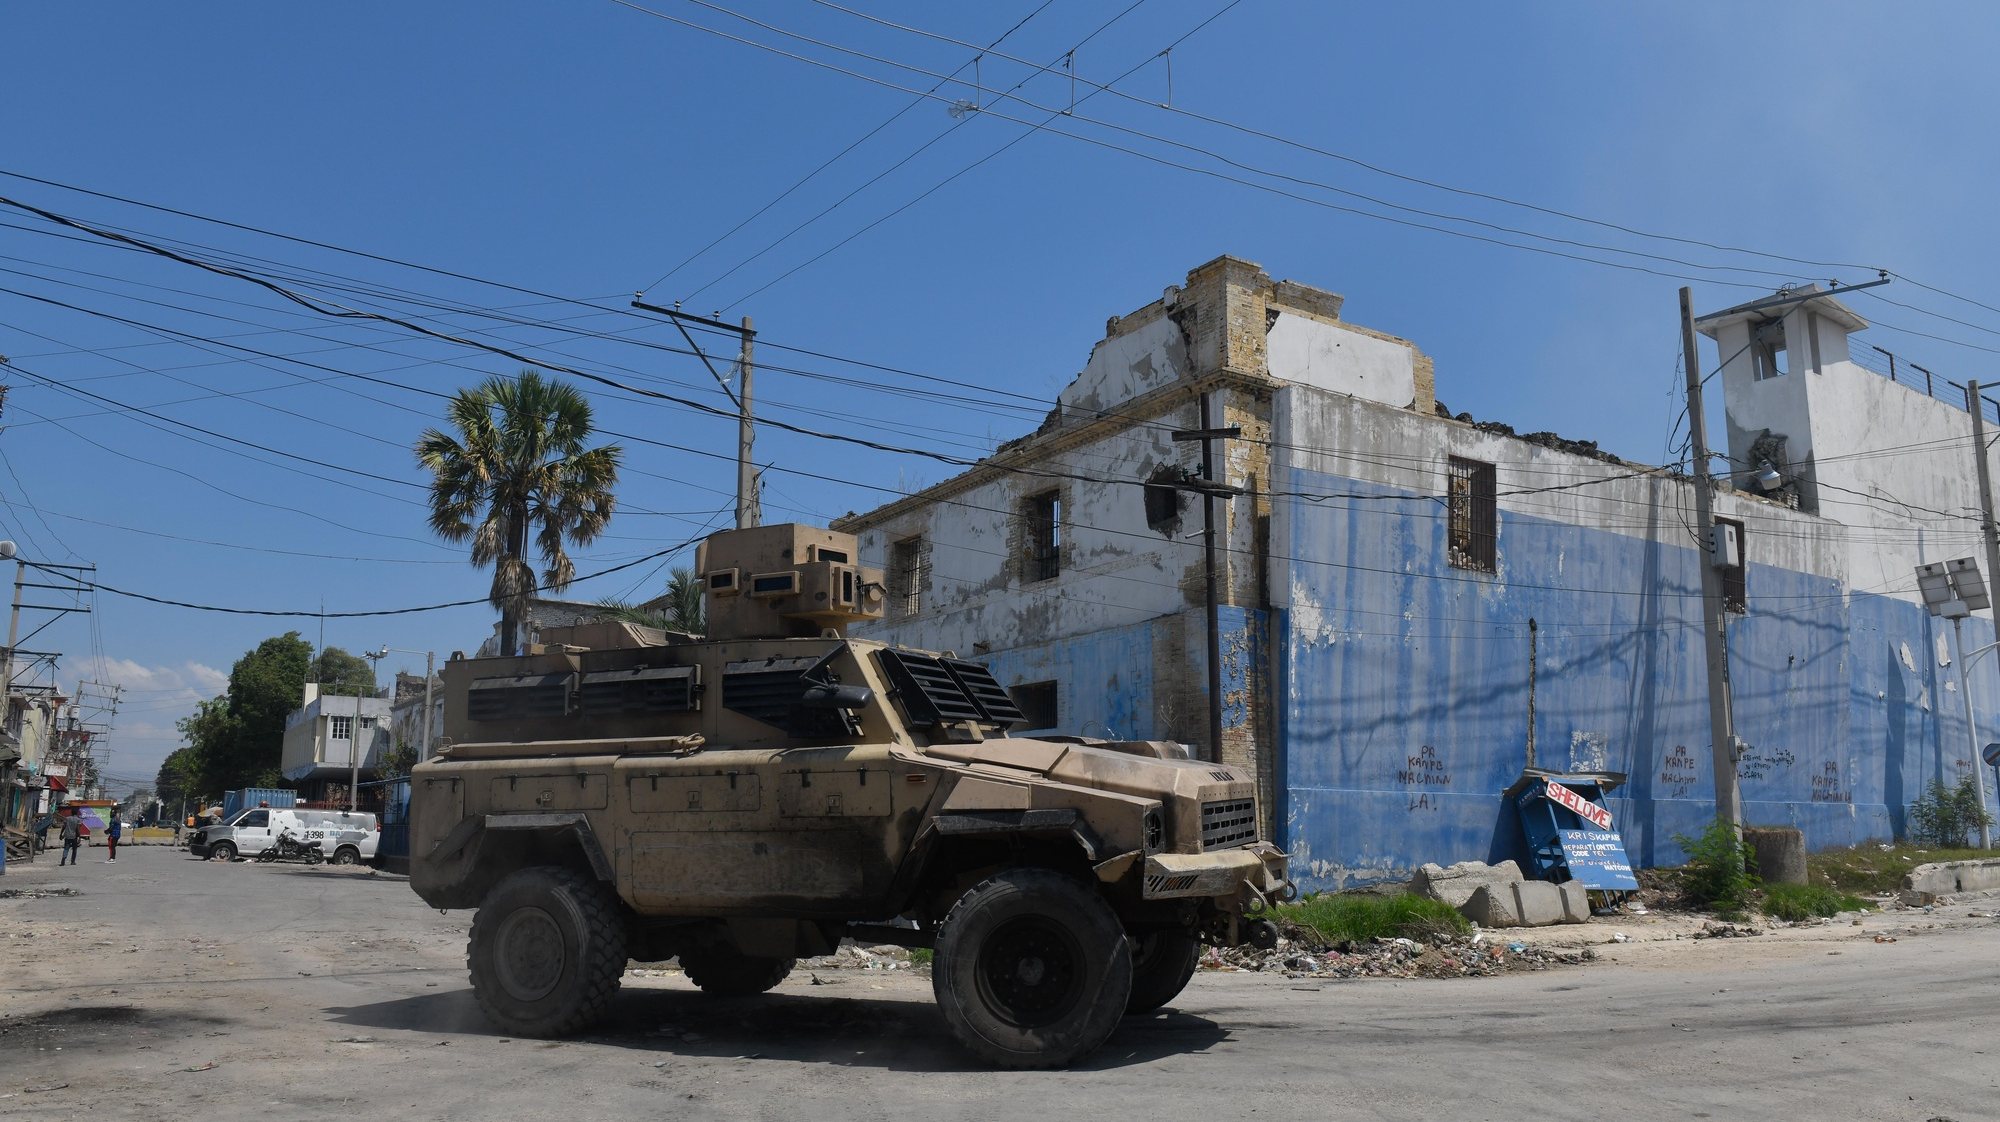 epa11220483 A military vehicle drives past the National Penitentiary after a fire broke out, in Port-au-Prince, Haiti, 14 March 2024. The penitentiary was attacked by armed gangs on 02 March, causing a prison break of around 3,000 inmates, including gang members and leaders. According to a statement by the Caribbean Community and Common Market (CARICOM) regional bloc on 11 March, Haiti&#039;s Prime Minister Ariel Henry announced his government would resign after the establishment of a transitional presidential council and the appointment of a new interim prime minister. Henry&#039;s resignation comes following weeks of crisis and gang violence in the country.  EPA/Johnson Sabin